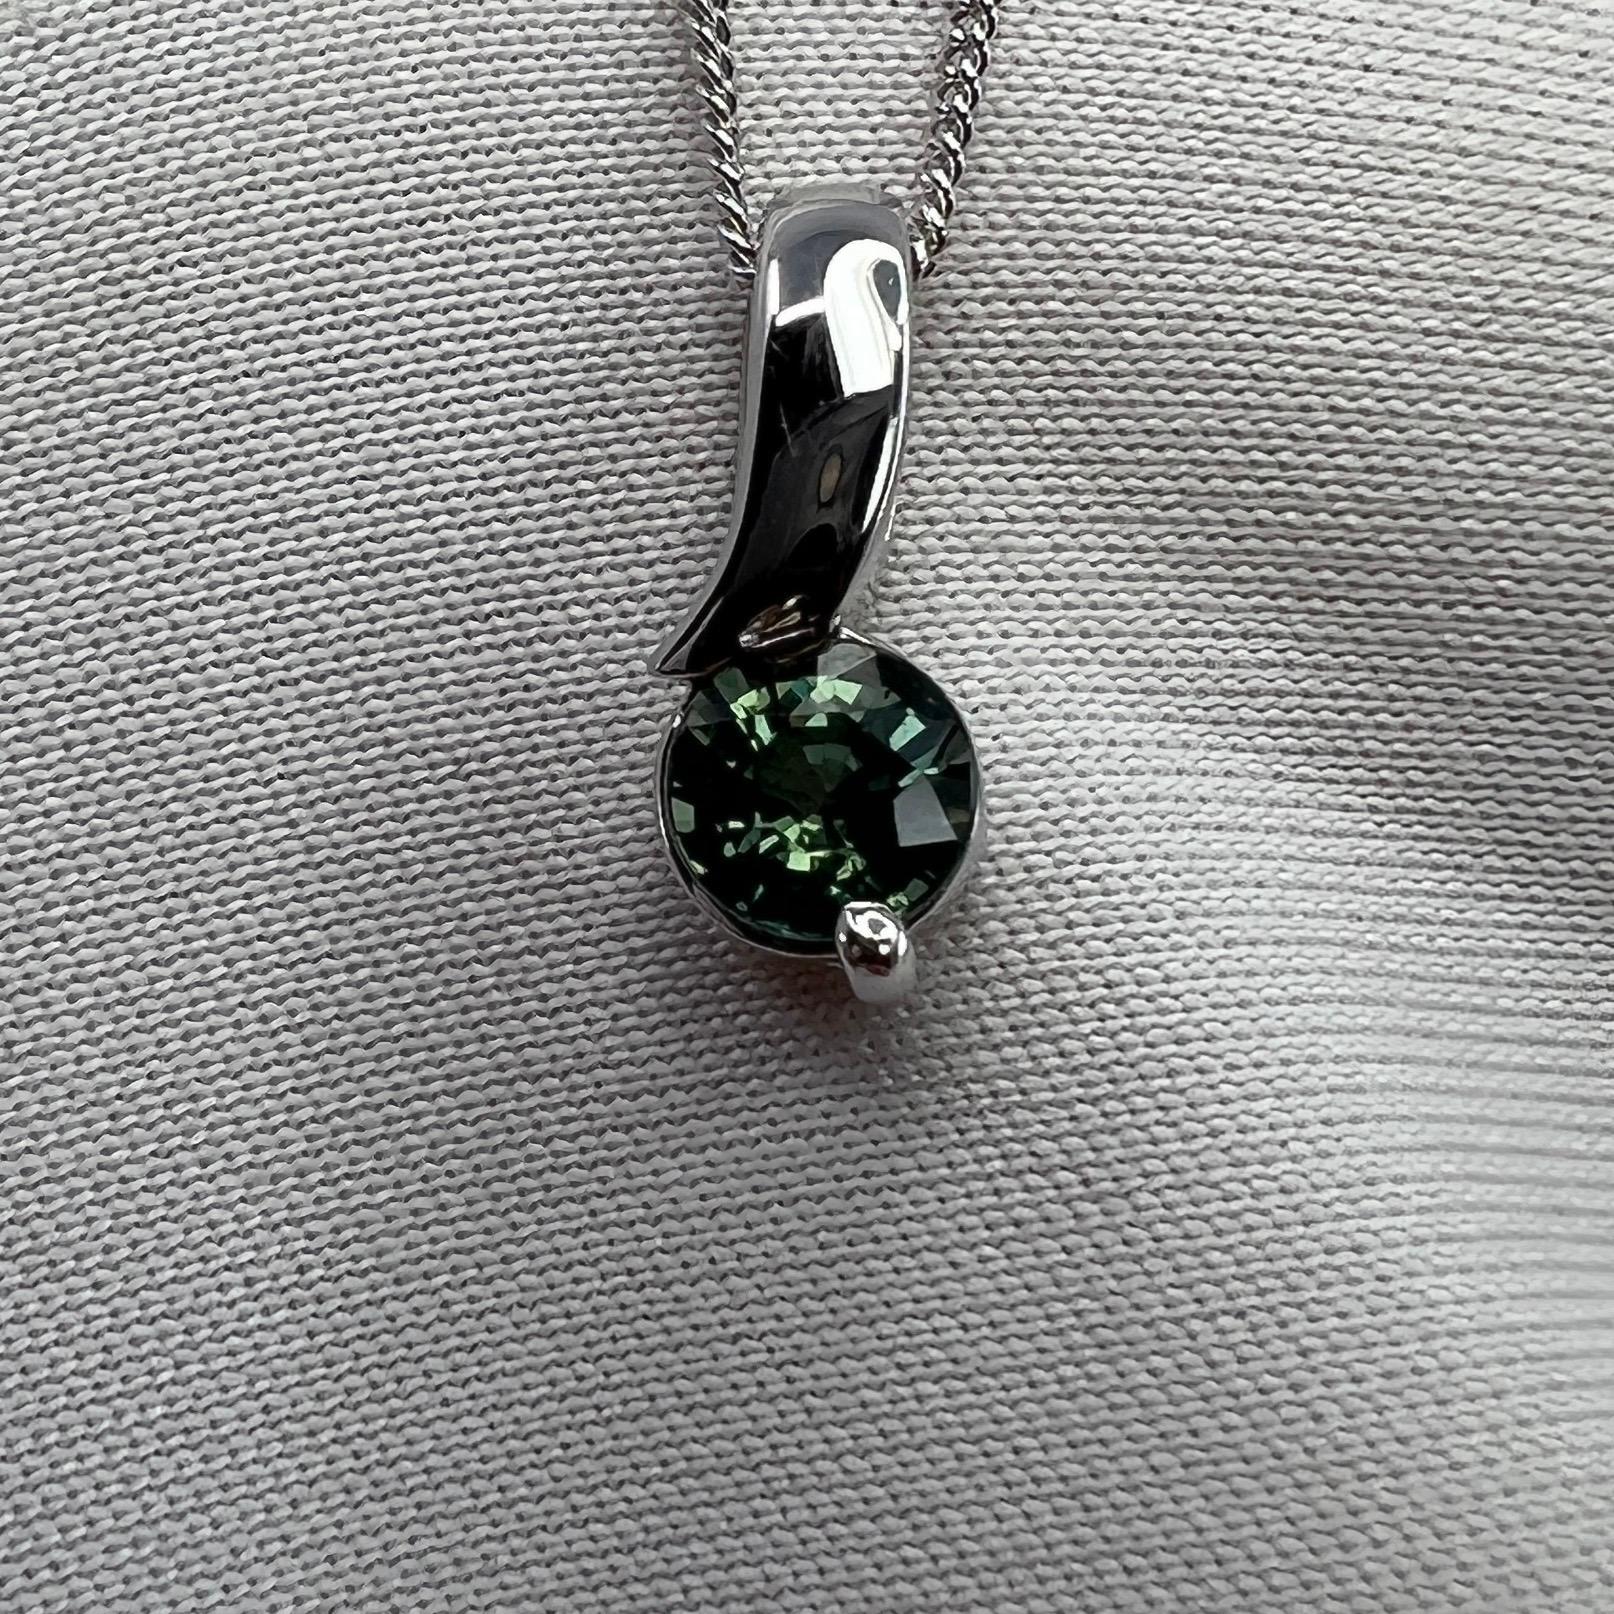 Fine Vivid Green Blue Untreated Australian Sapphire Round Cut 18k White Gold Solitaire Drop Pendant.

0.56 Carat sapphire with a beautiful vivid green blue colour and excellent clarity, very clean stone. Also has an excellent round brilliant cut